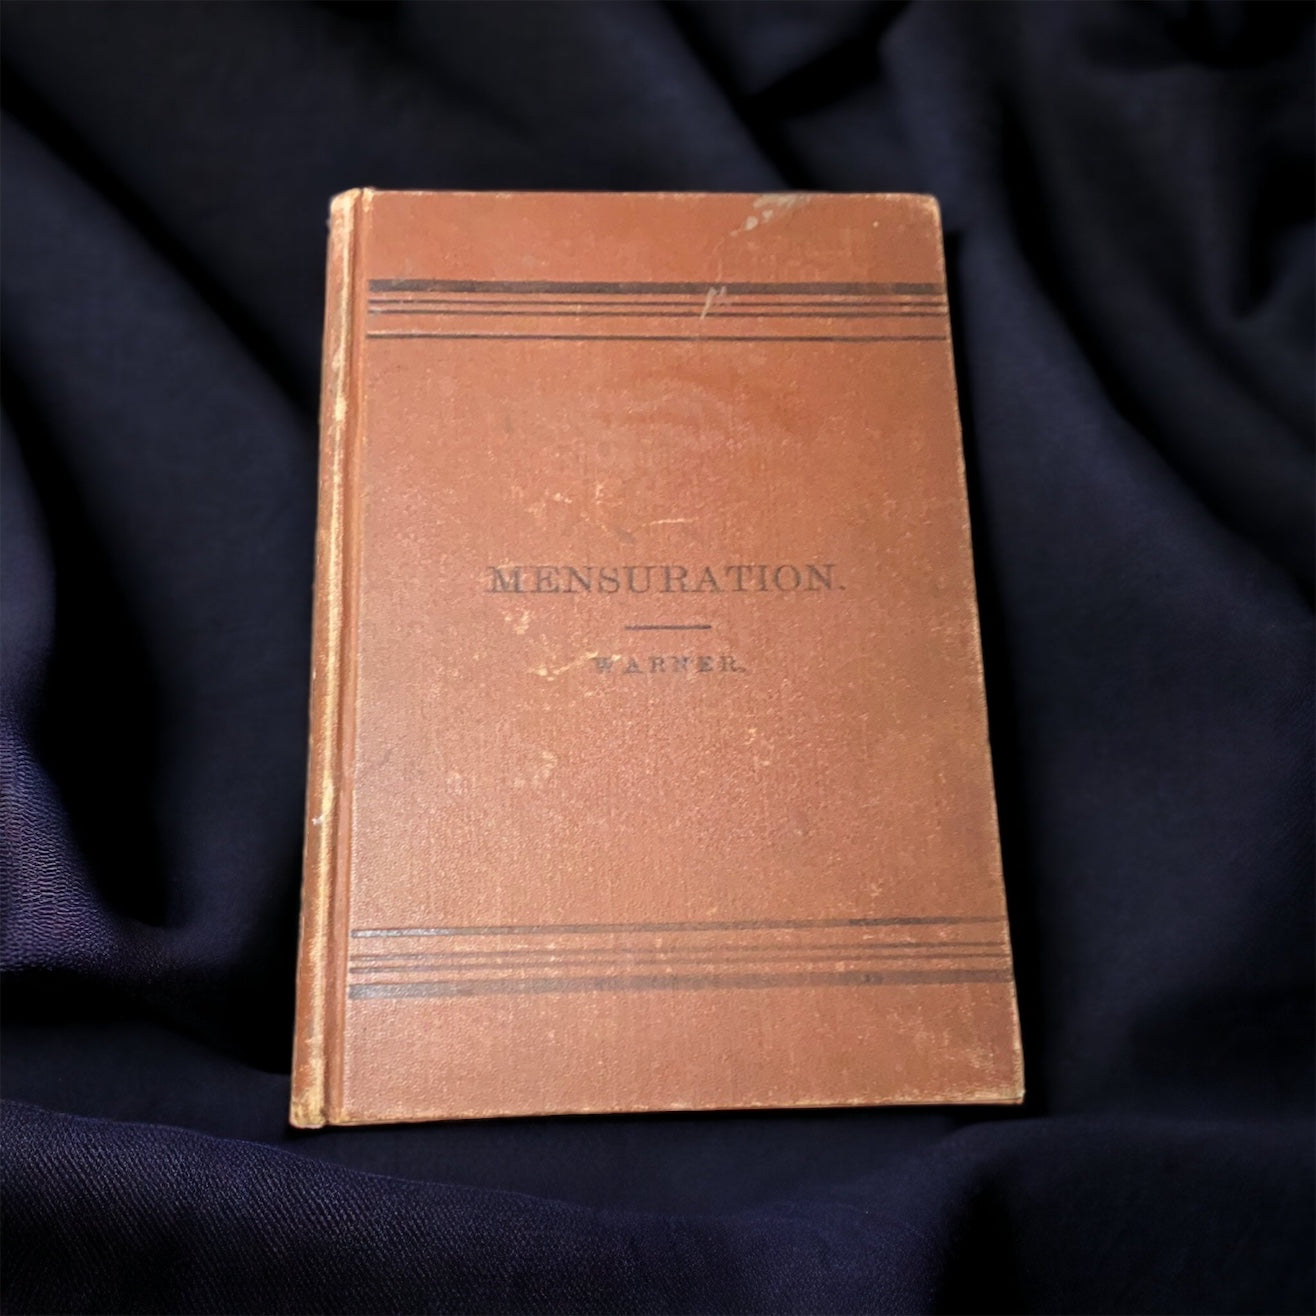 Elements Of Mensuration by Charles Dudley Warner, 1886 (First Edition)